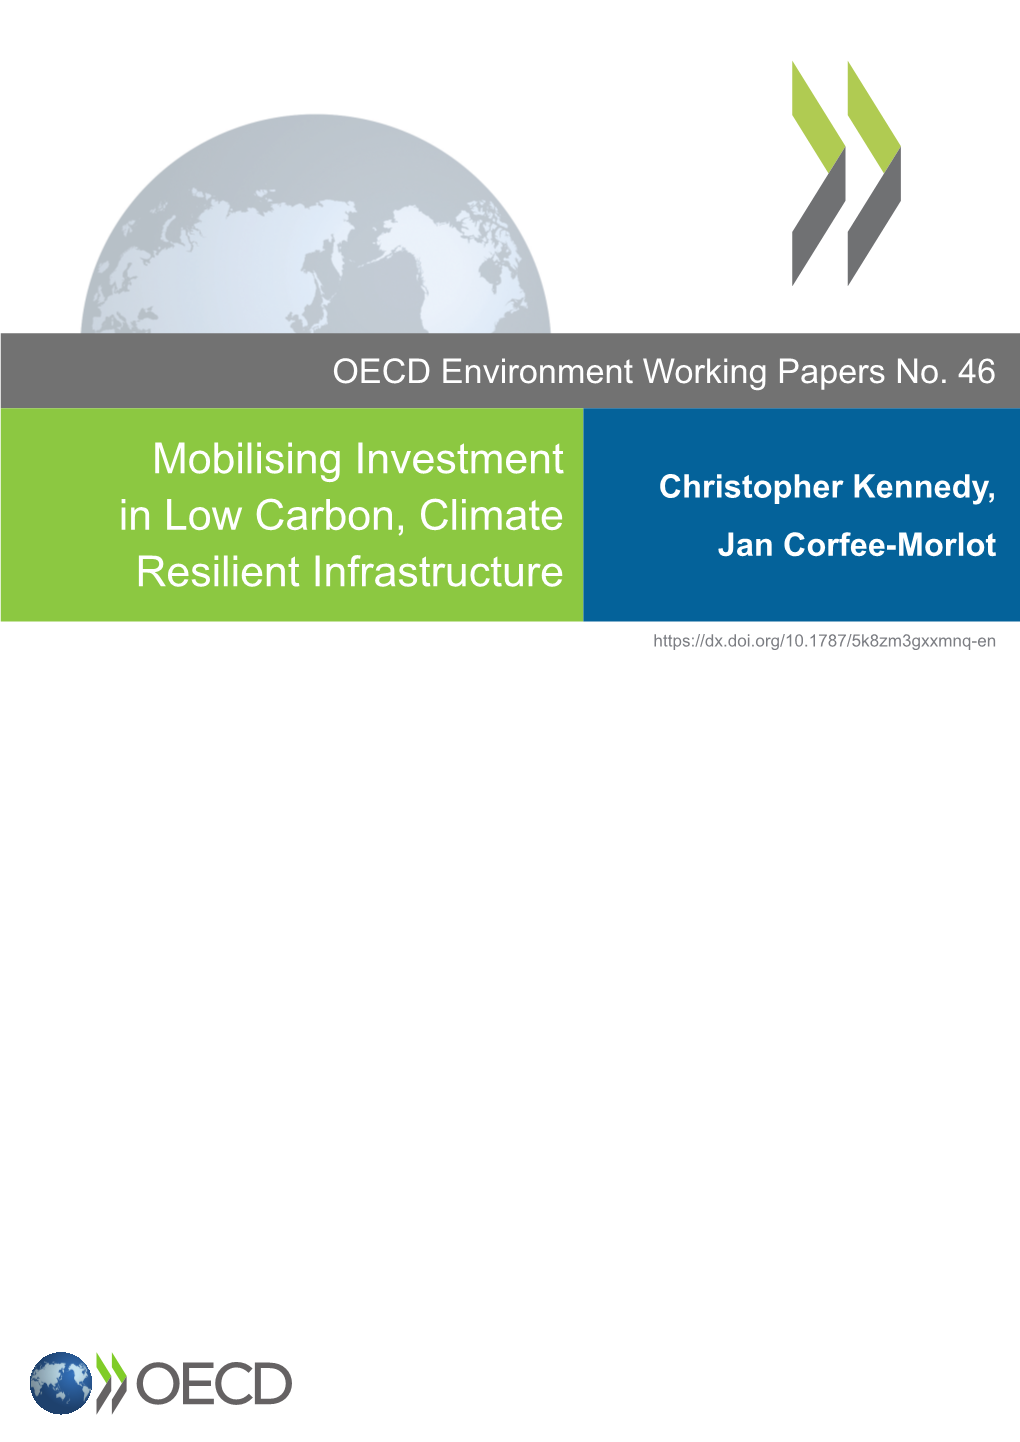 Mobilising Investment in Low Carbon, Climate Resilient Infrastructure